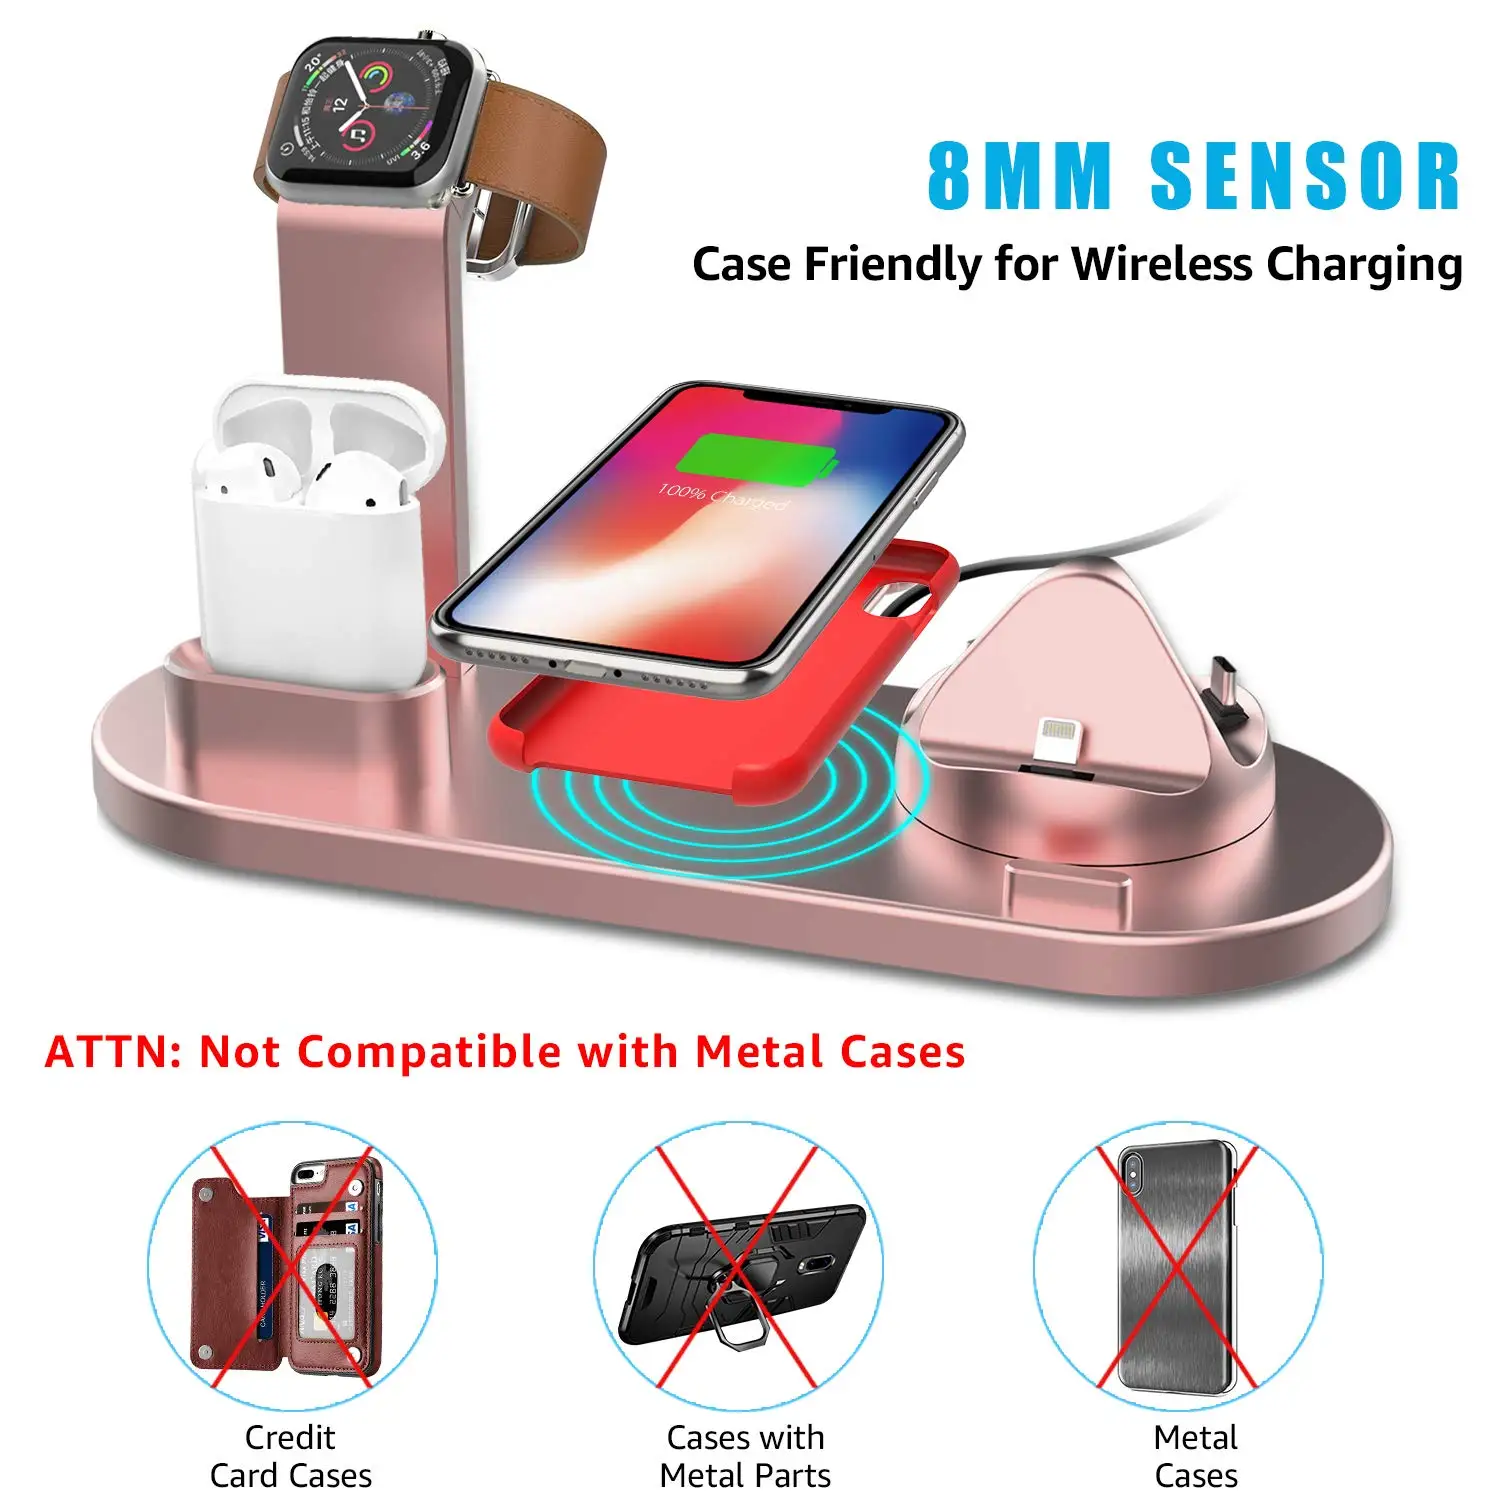 
Wireless Charger Dock 4in1 Multiple Device Fast Charging Station Qi Fast Wireless Charging Stand Compatible for iphone 11 